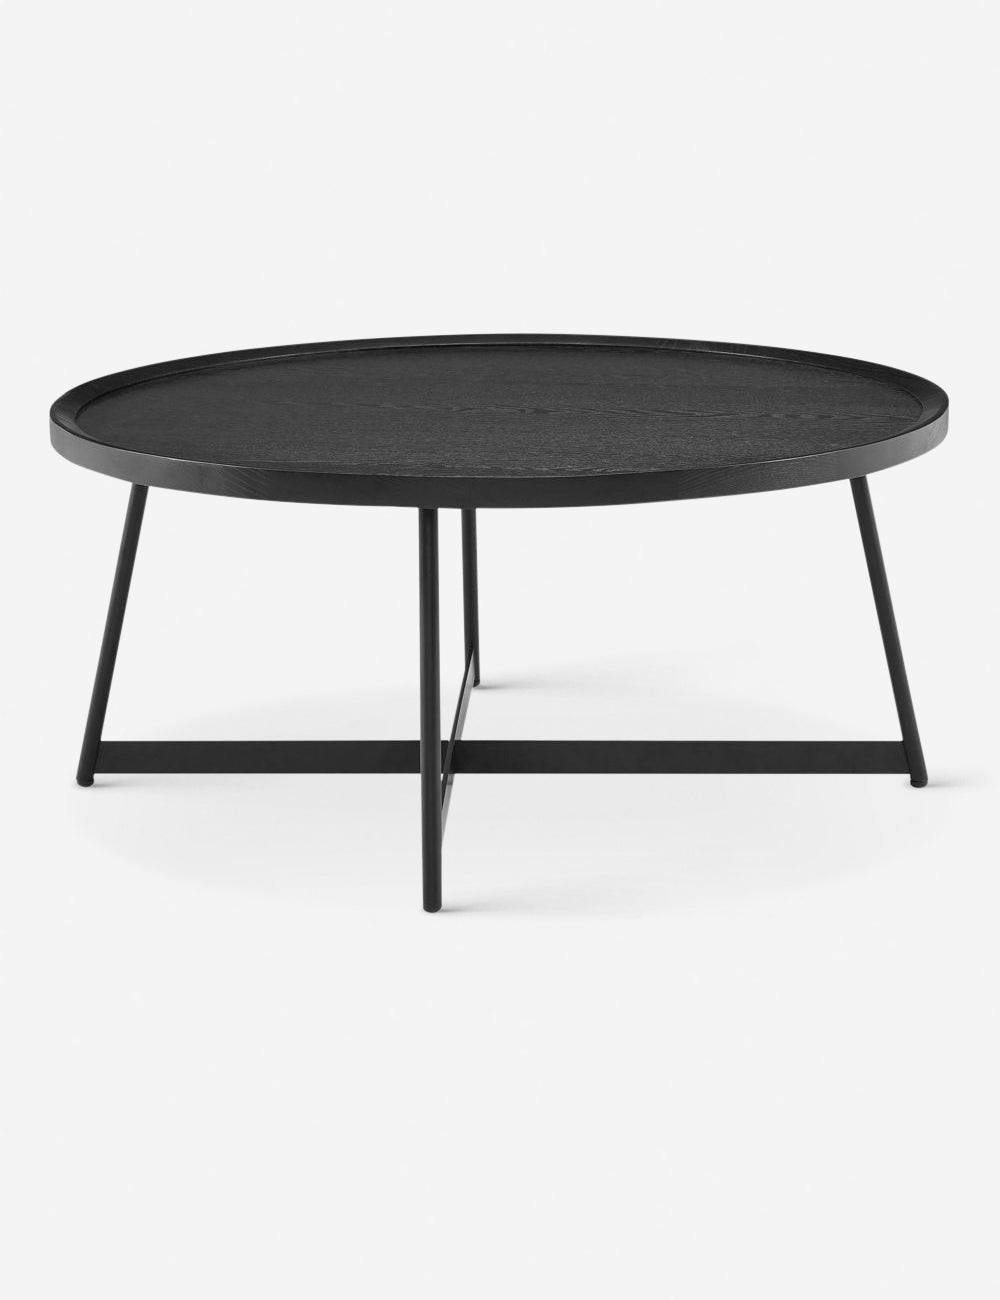 Niklaus 35" Symmetrical Round Coffee Table in Walnut and Black